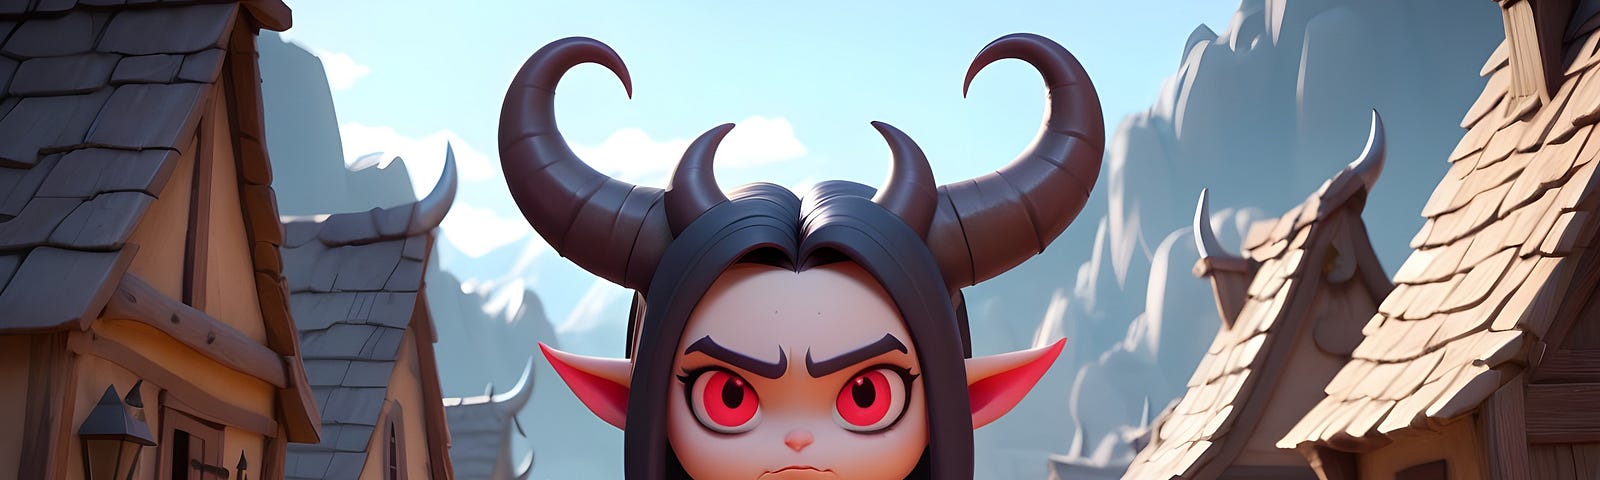 a young girl with large demonic horns, in a rustic village